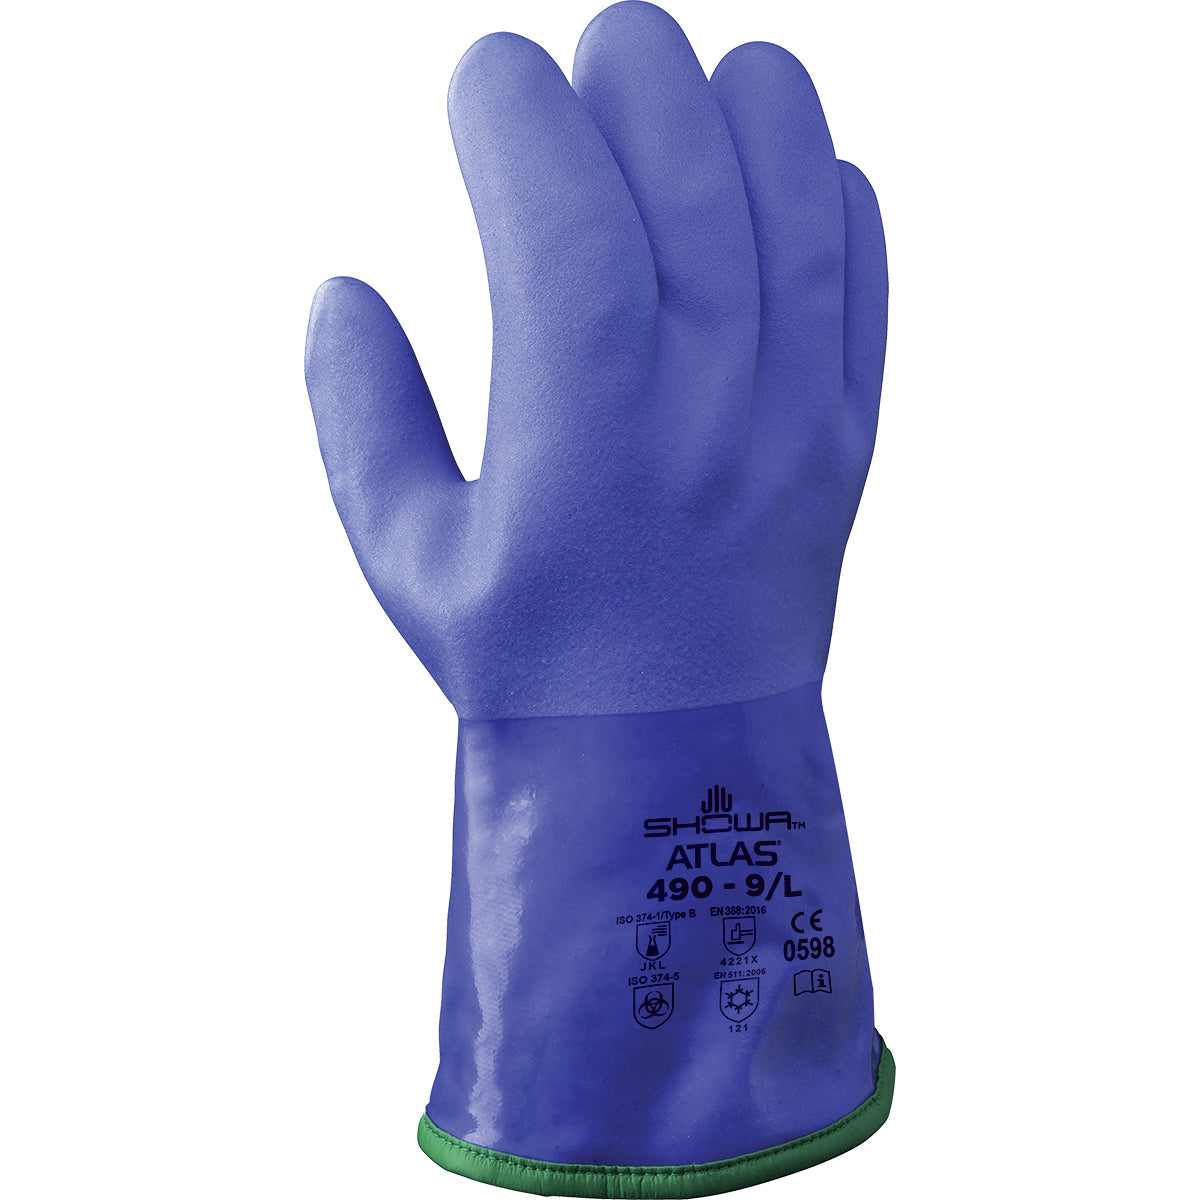 Showa Atlas 490 Acrylic Insulated Triple Dipped Rough Grip PVC Glove Work Gloves and Hats - Cleanflow